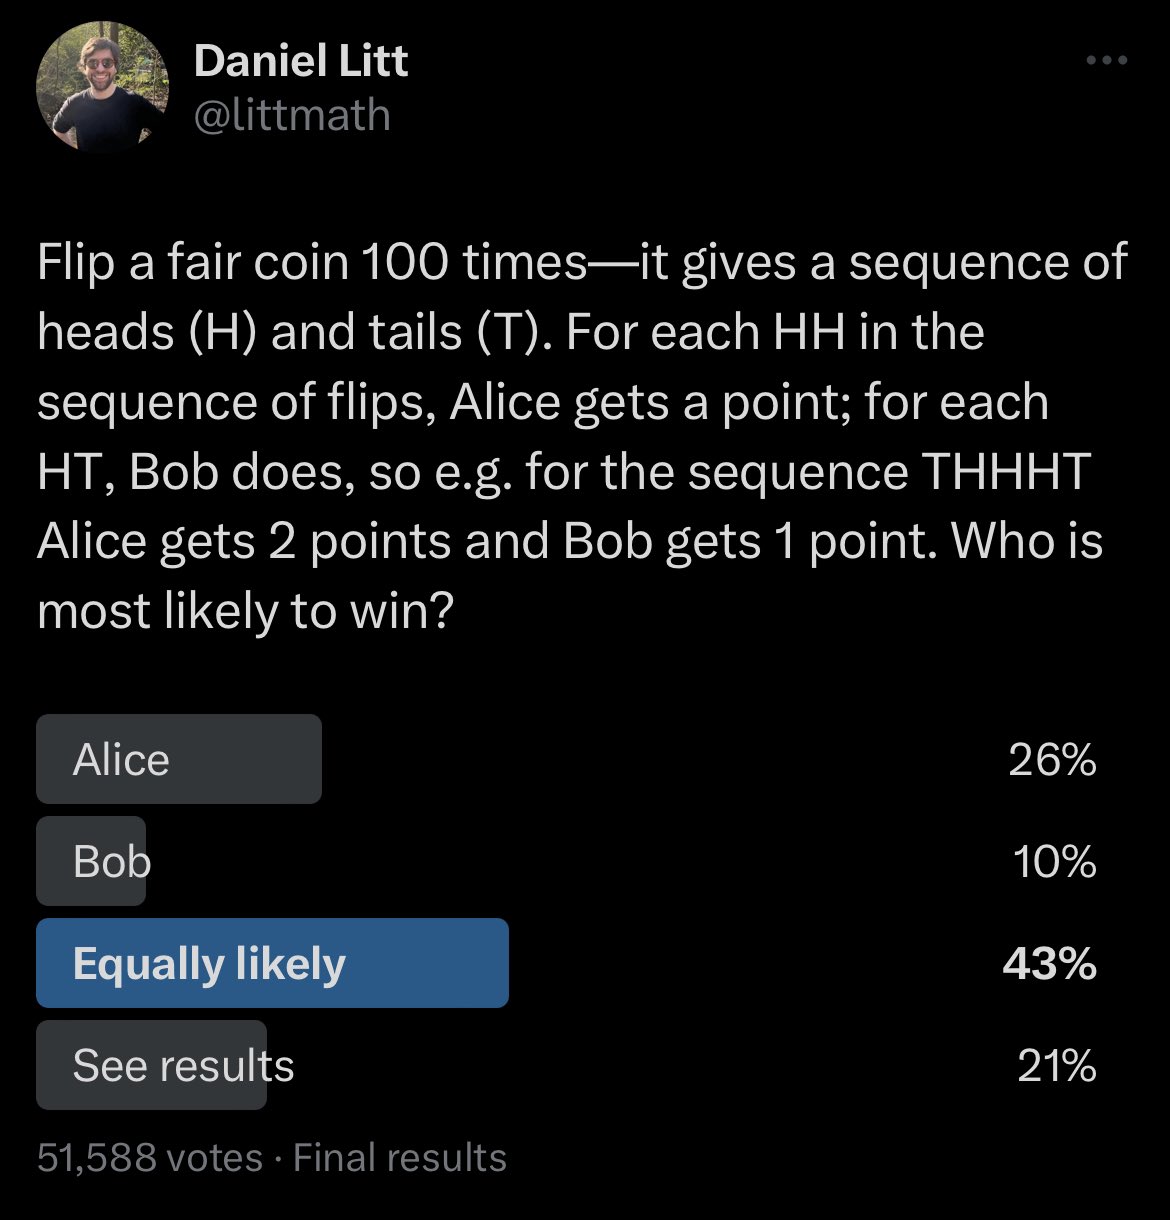 A screenshot of the results of the Twitter poll with the results: Alice 26%, Bob 10%, Equally likely 43%, See results 21%